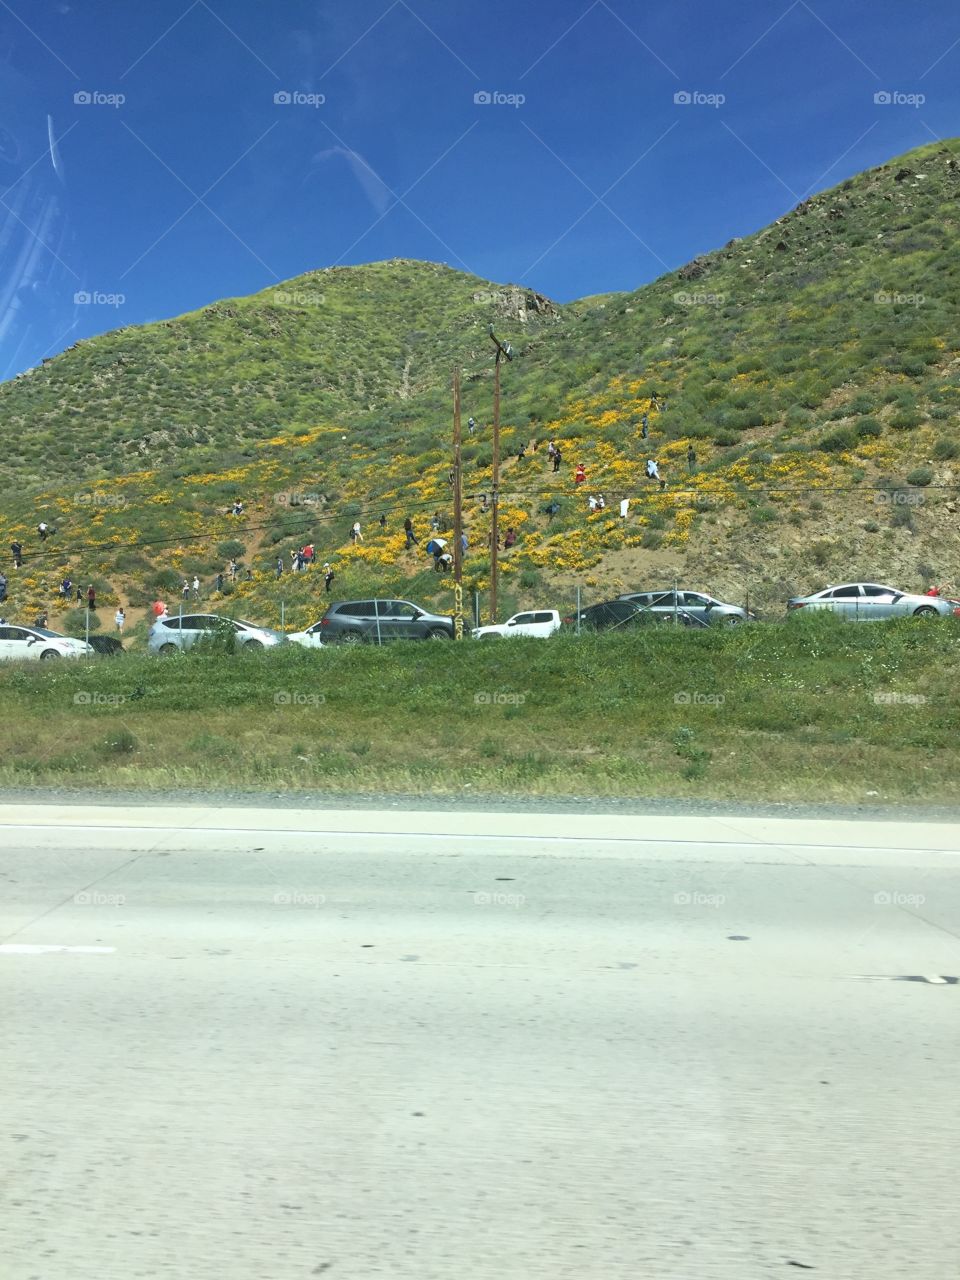 People climbing mountain for flowers